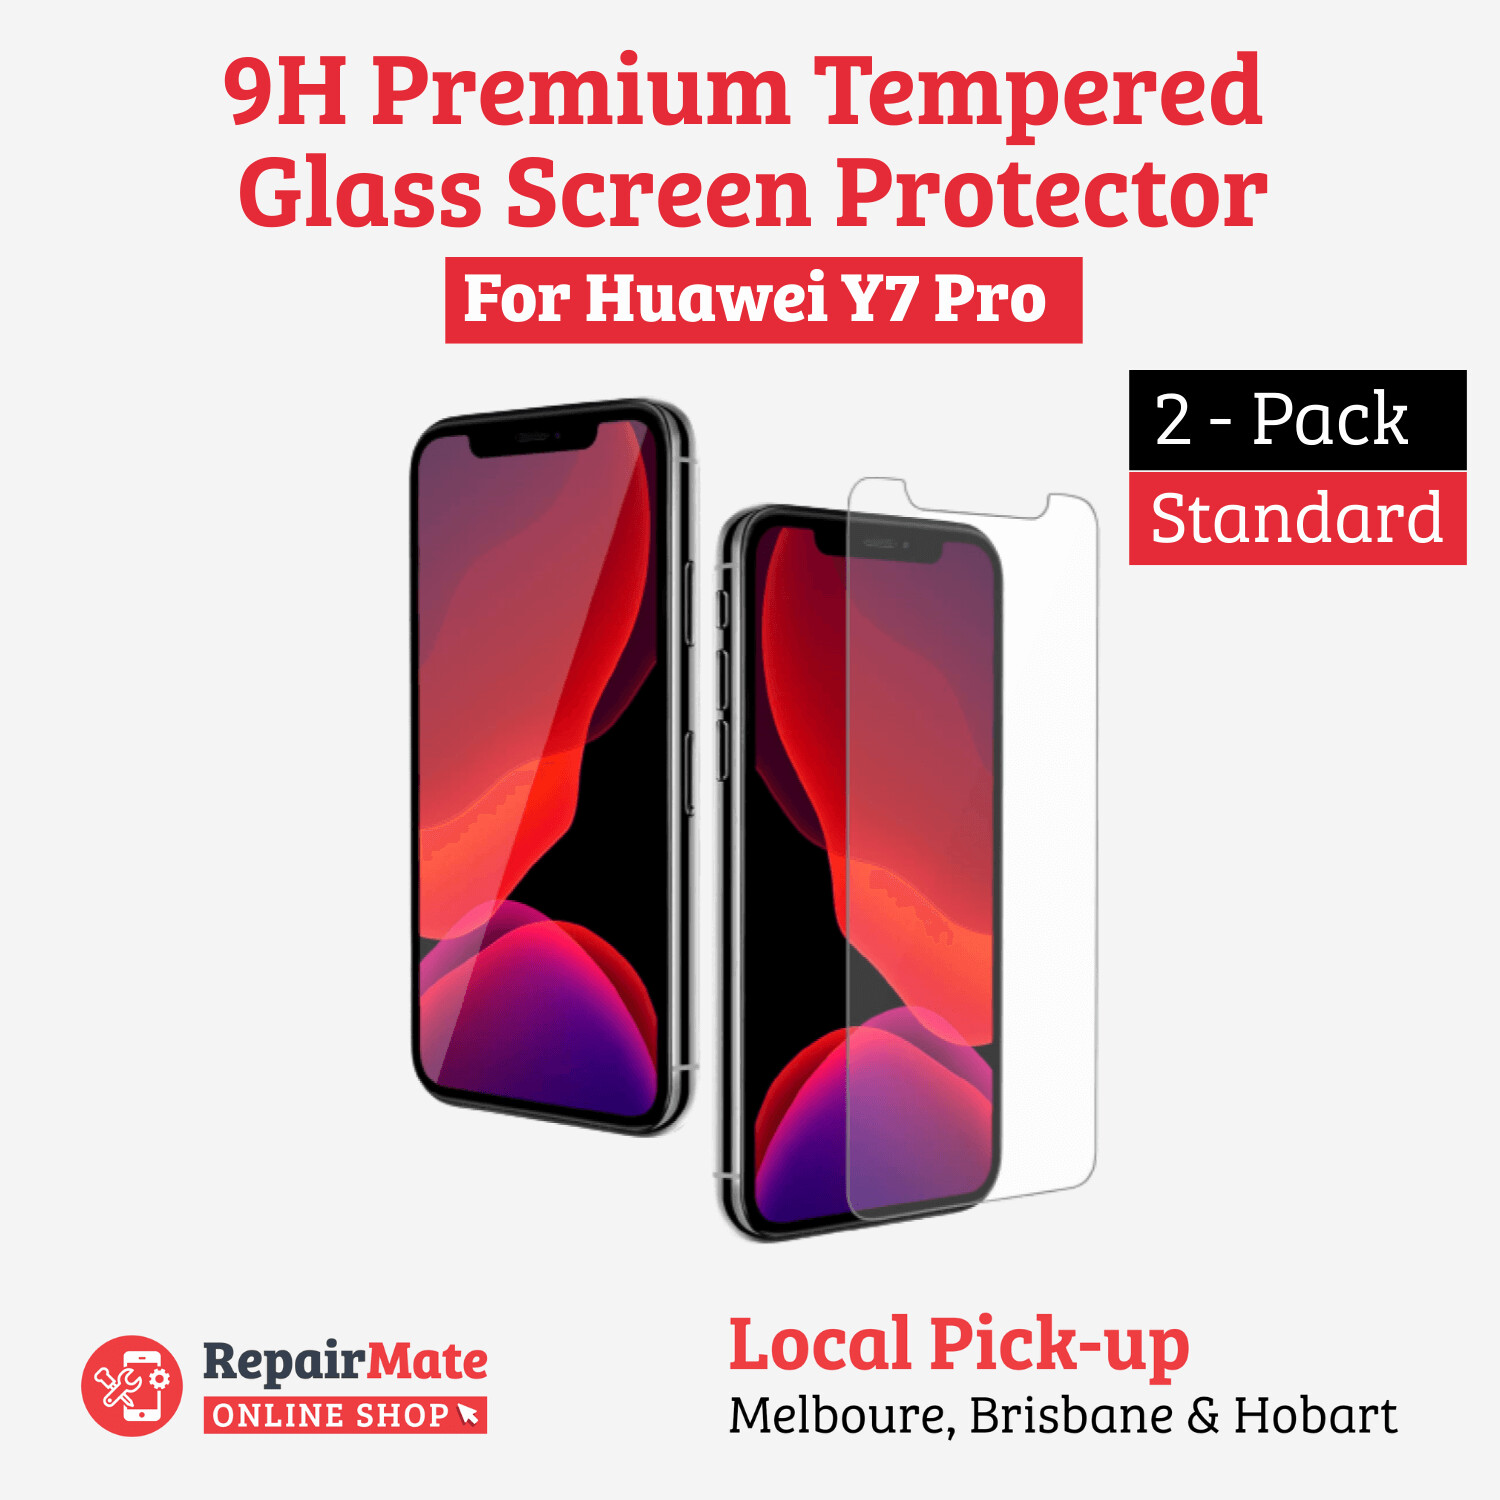 Huawei Y7 Pro (2018) 9H Premium Tempered Glass Screen Protector [2 Pack]